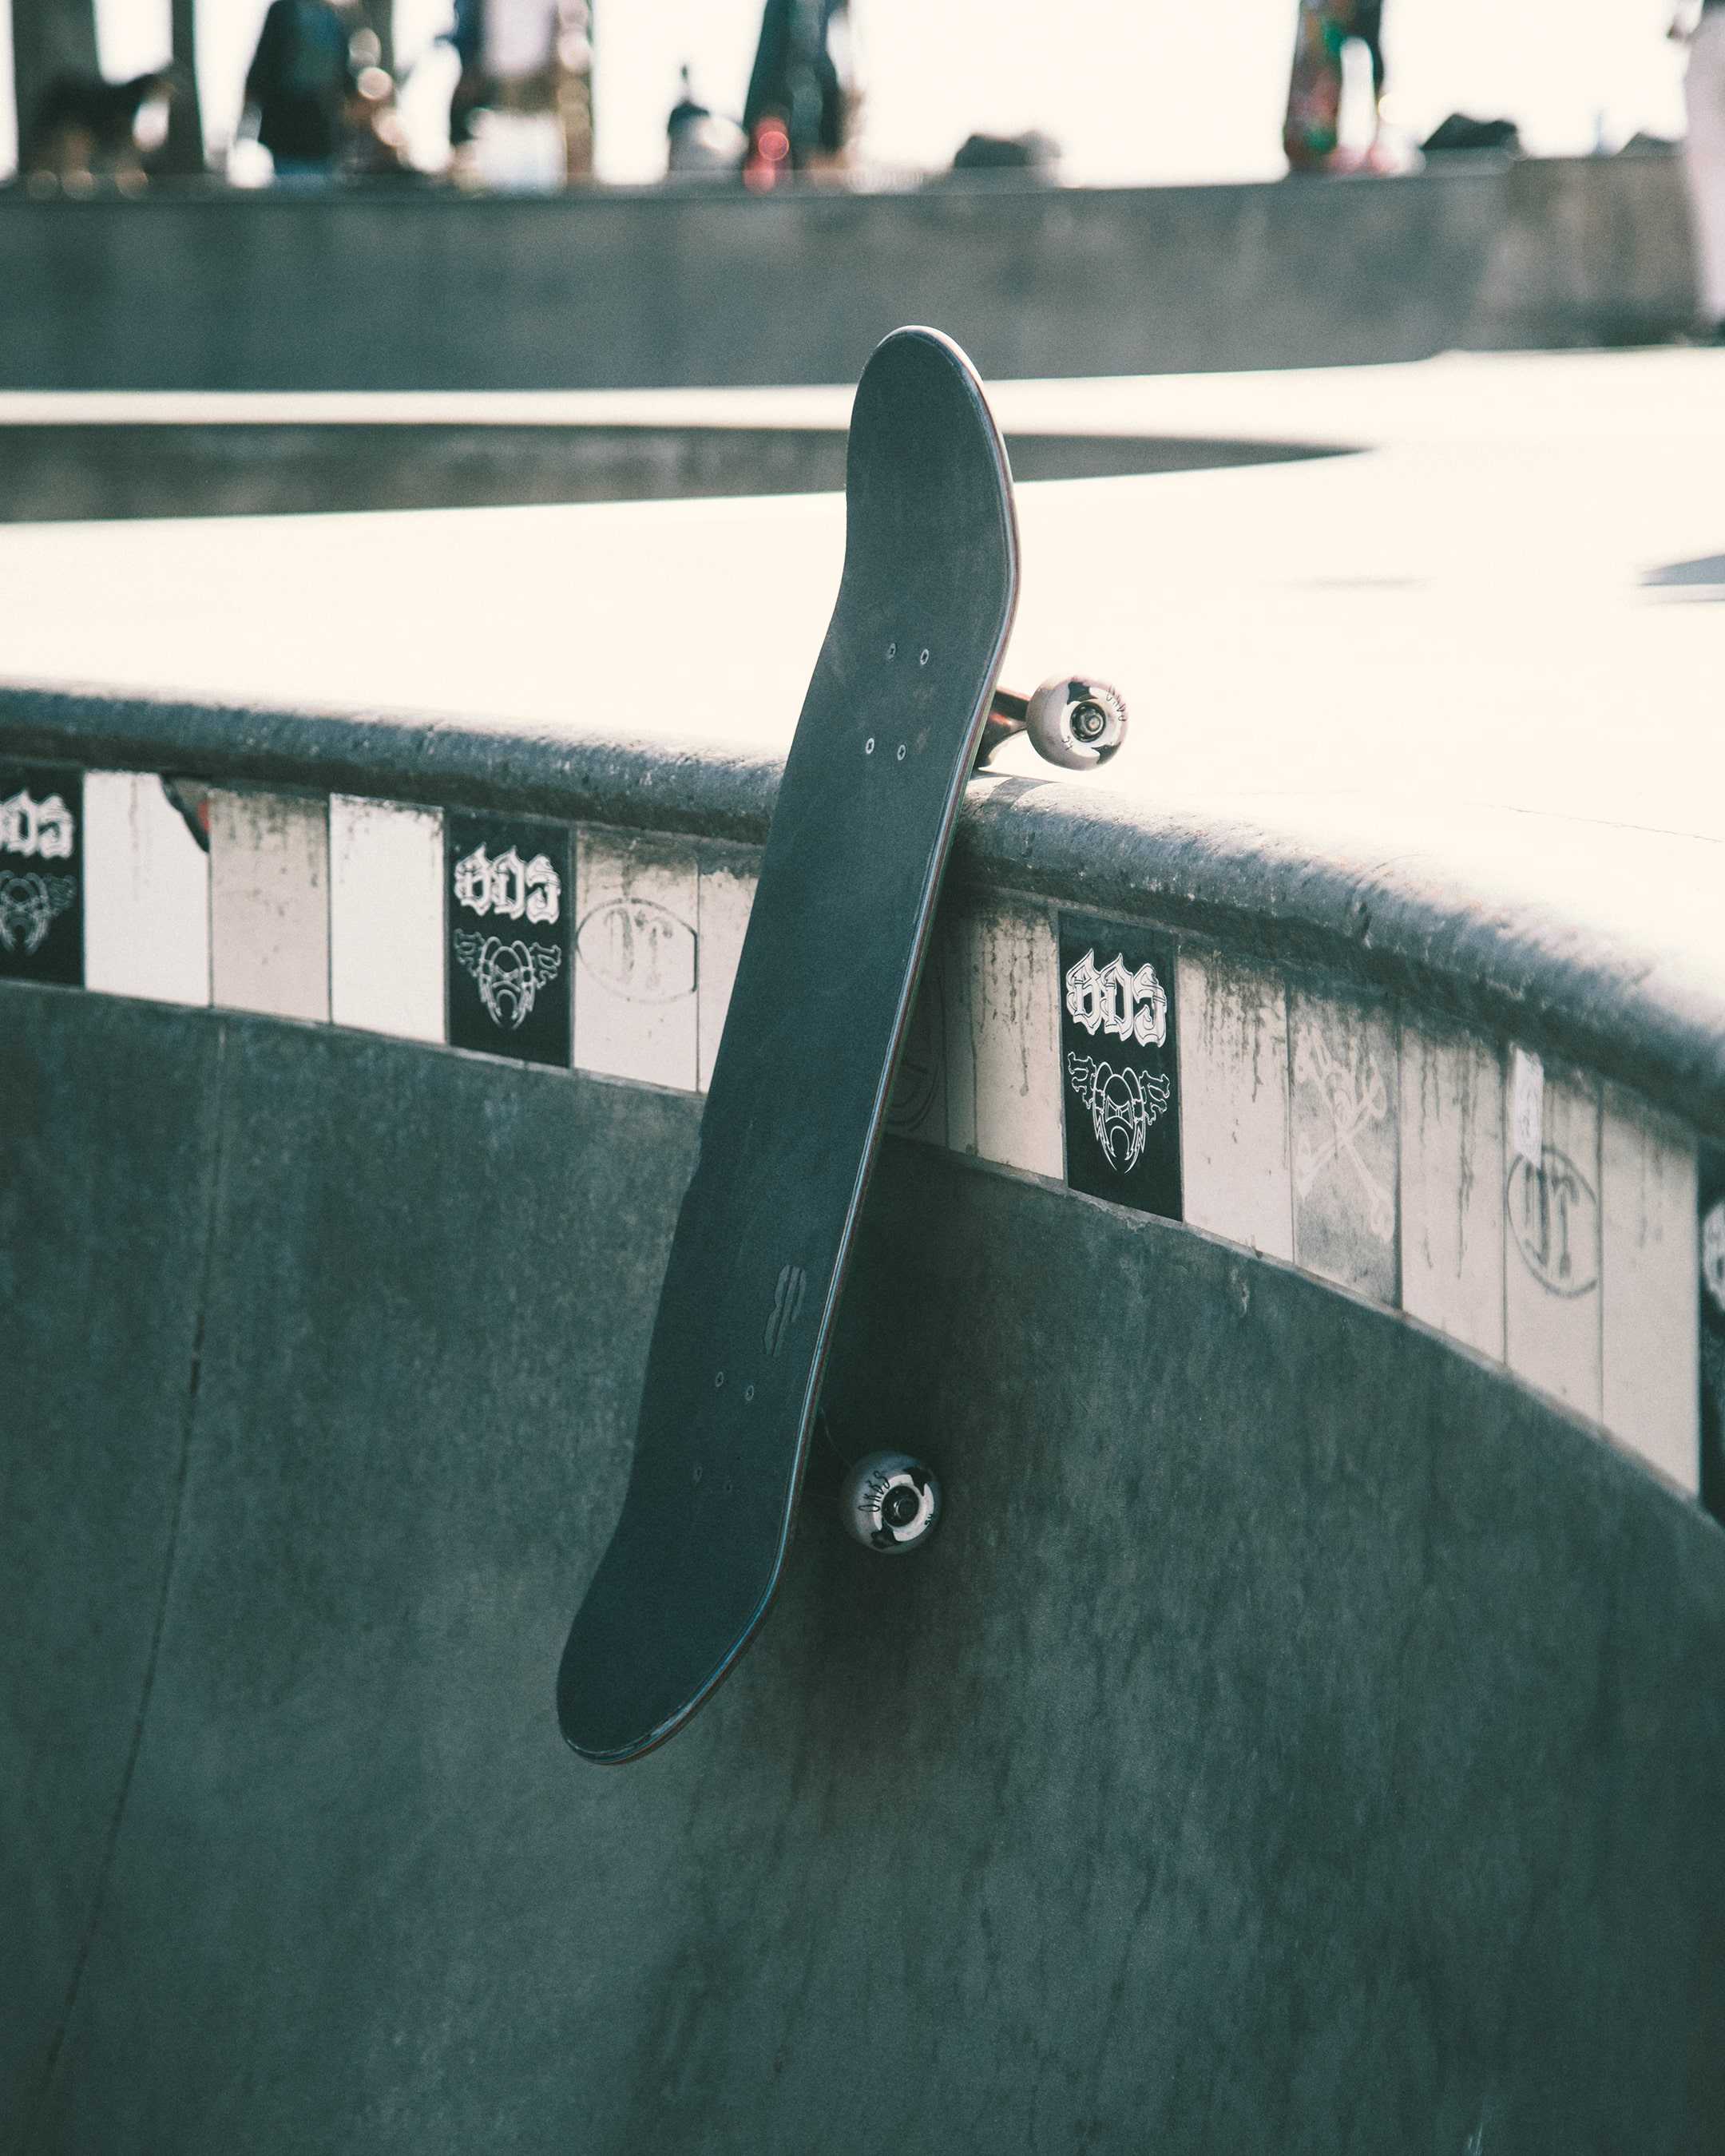 A skateboard is stuck in the side of a ramp at a skate park. - Skate